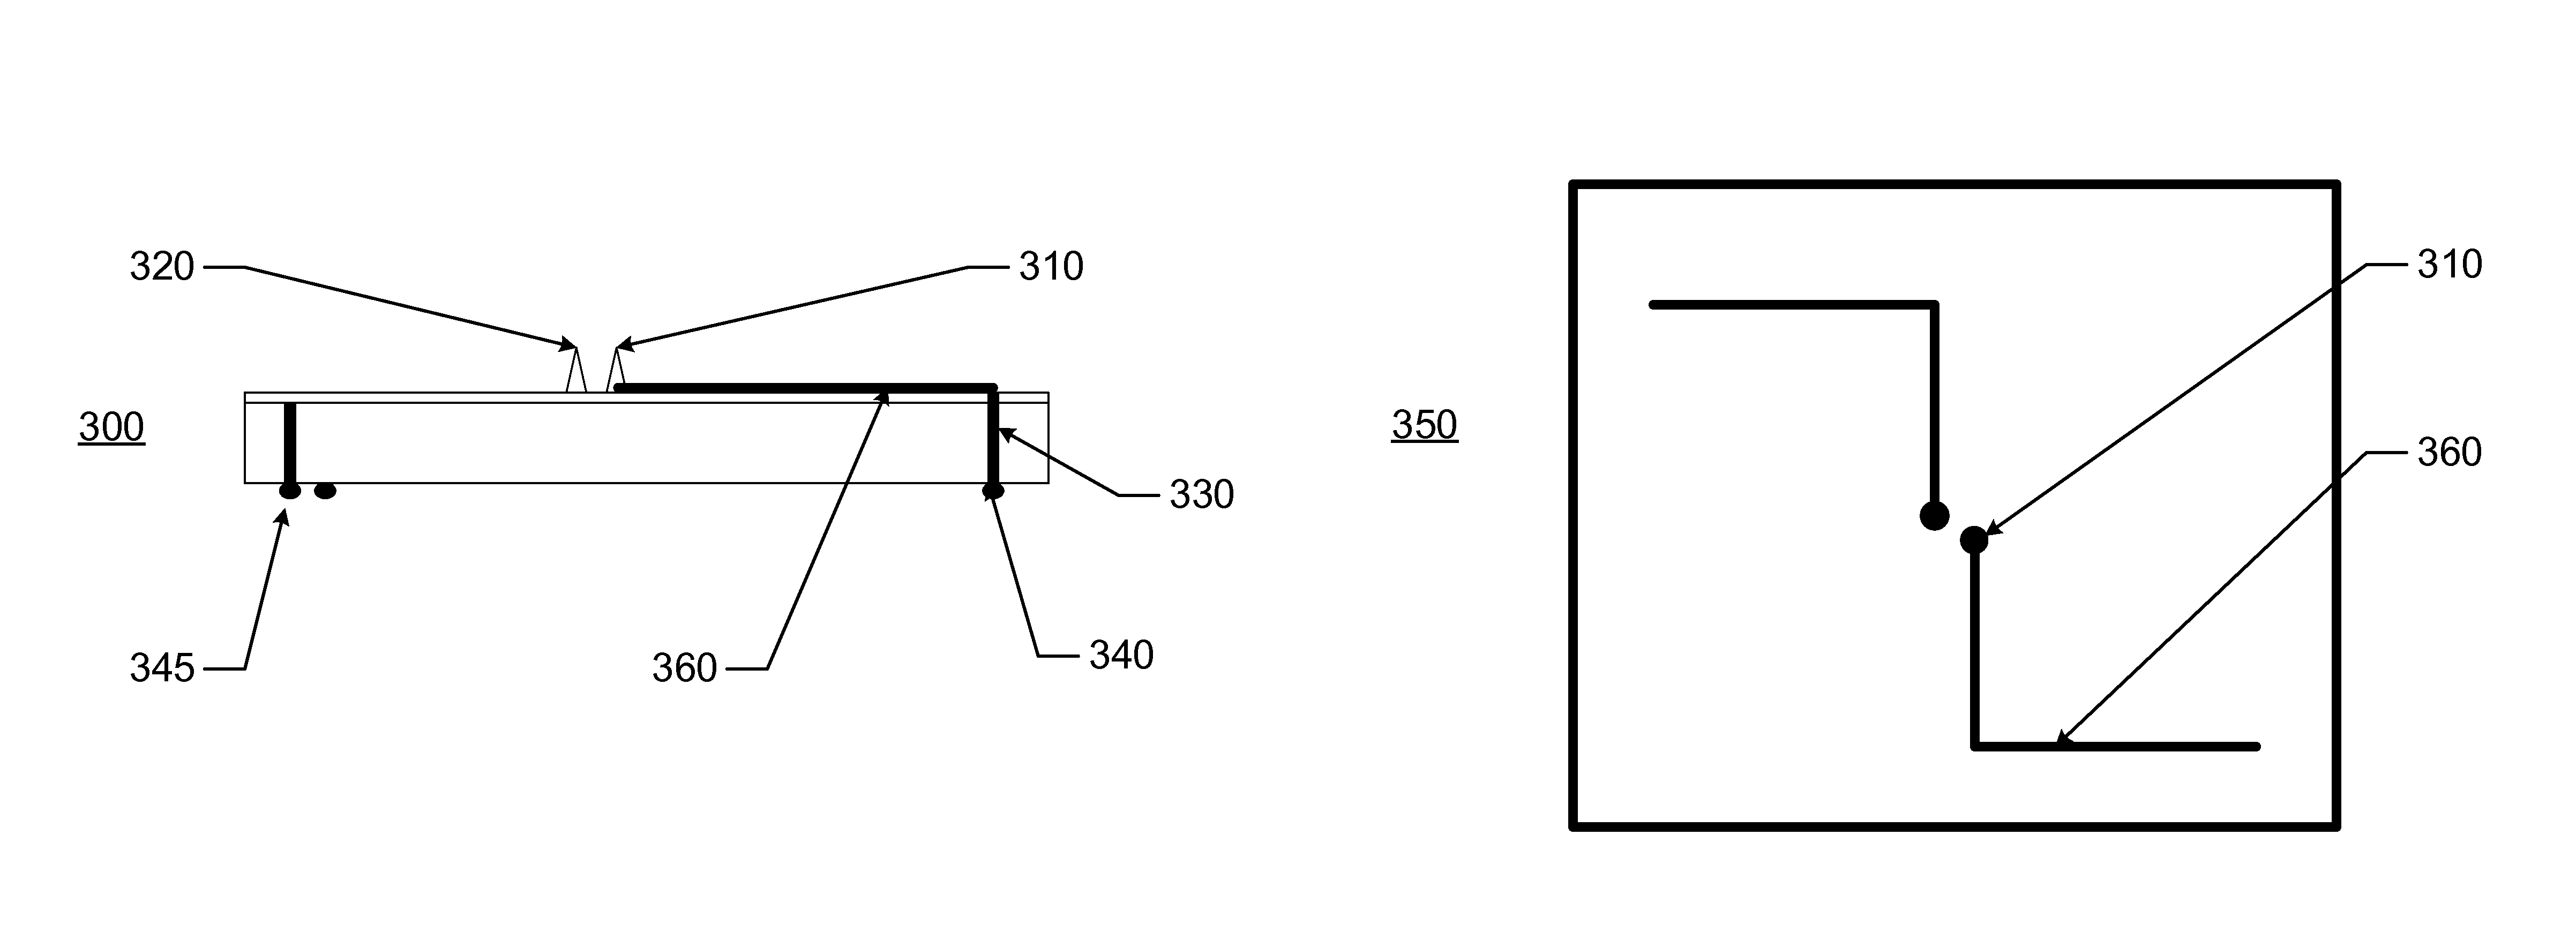 Method and apparatus for a high resolution imaging system